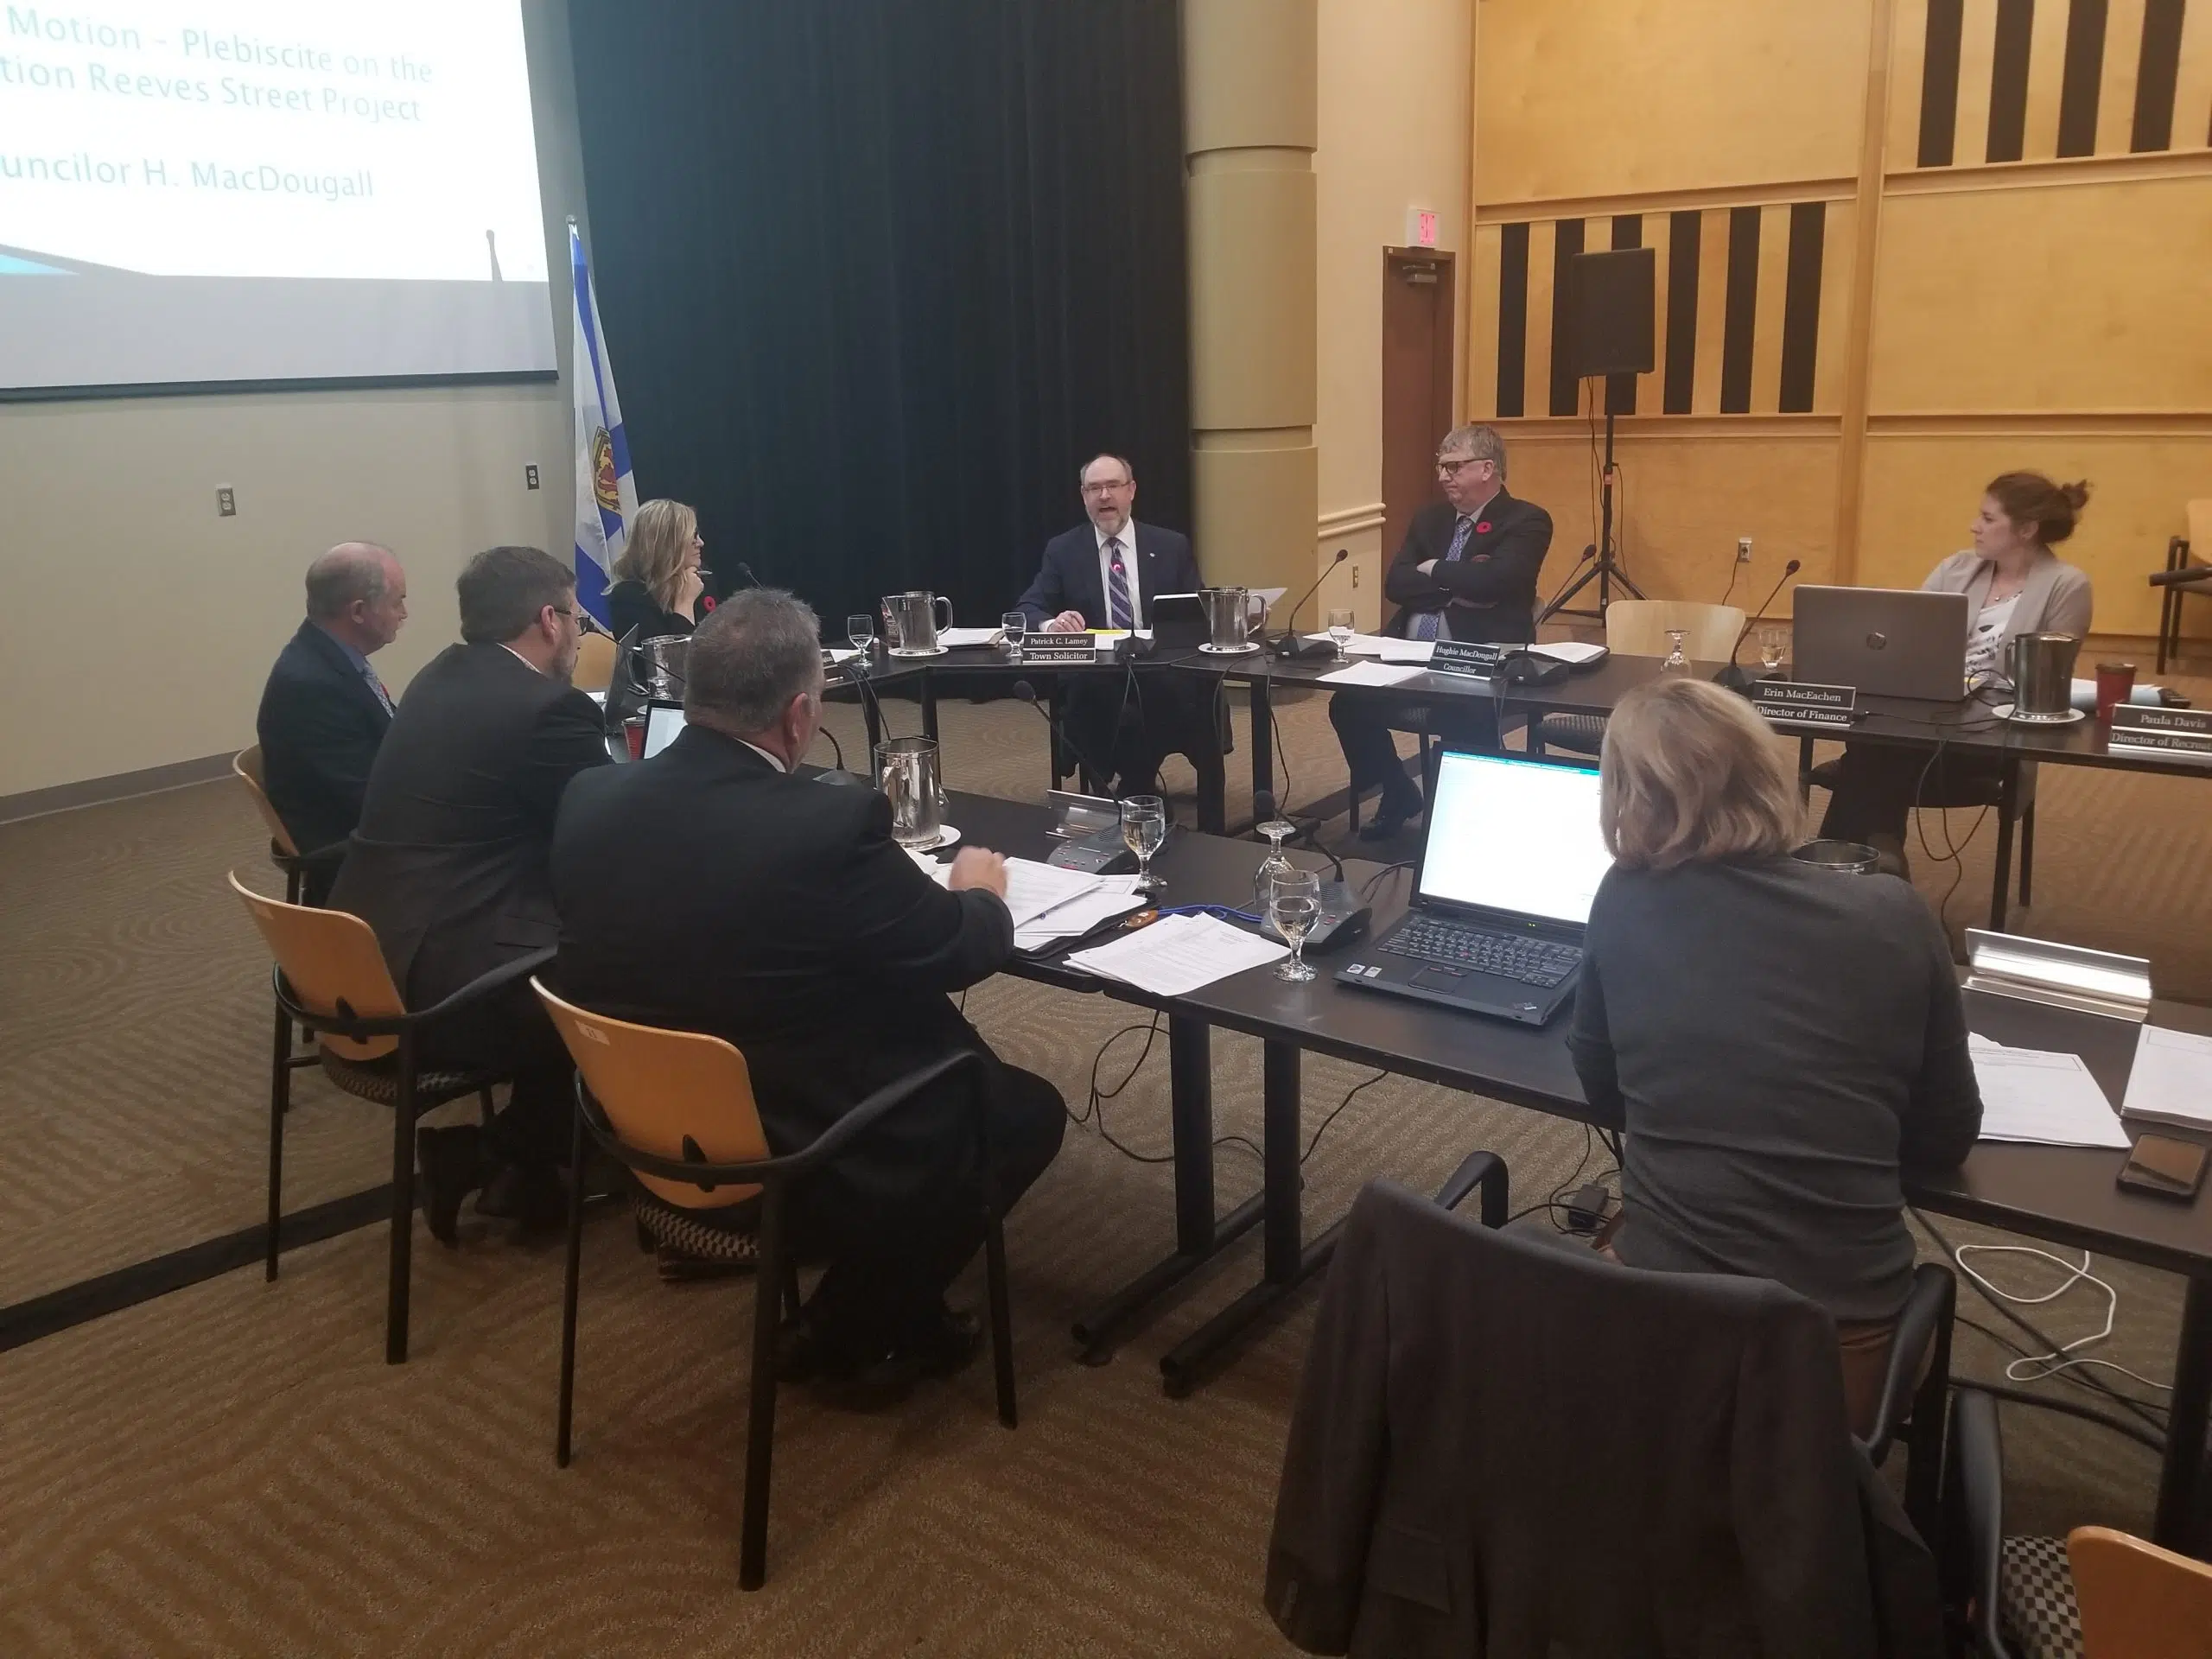 Councillors defeat motion to hold plebiscite on Reeves St. lane reduction